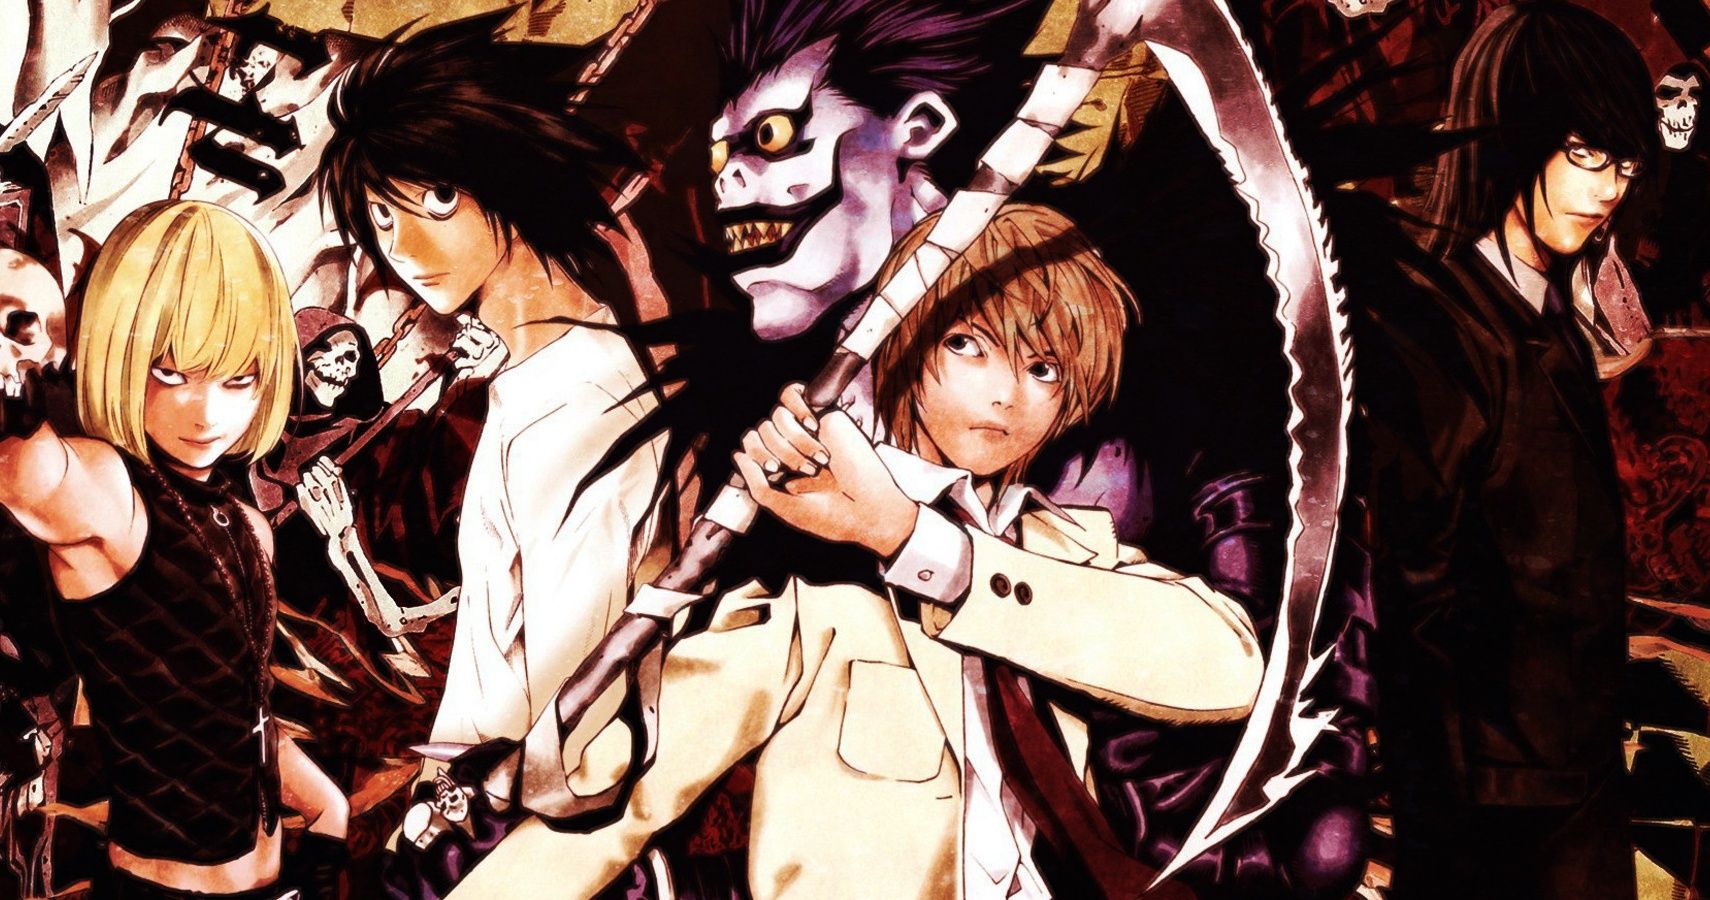 Which Death Note Character Are You Based On Your Zodiac Sign?